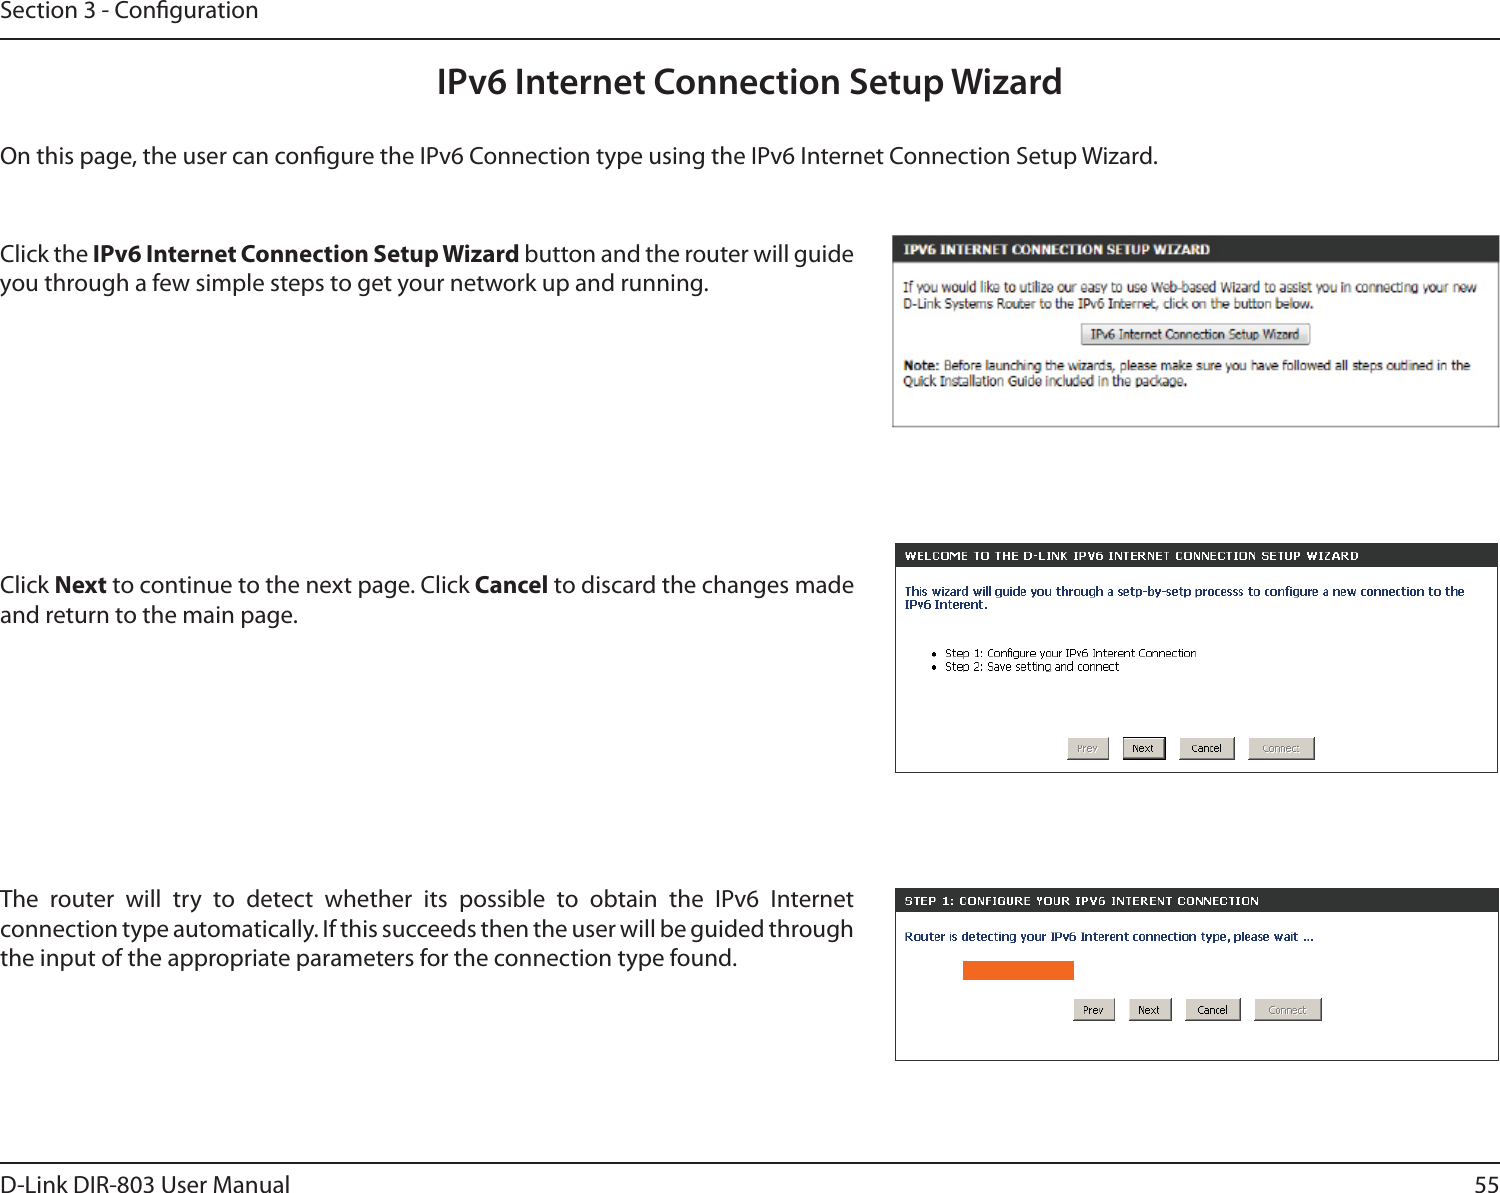 55D-Link DIR-803 User ManualSection 3 - CongurationIPv6 Internet Connection Setup WizardOn this page, the user can congure the IPv6 Connection type using the IPv6 Internet Connection Setup Wizard.Click the IPv6 Internet Connection Setup Wizard button and the router will guide you through a few simple steps to get your network up and running.Click Next to continue to the next page. Click Cancel to discard the changes made and return to the main page.The router will try to detect whether its possible to obtain the IPv6 Internet connection type automatically. If this succeeds then the user will be guided through the input of the appropriate parameters for the connection type found.